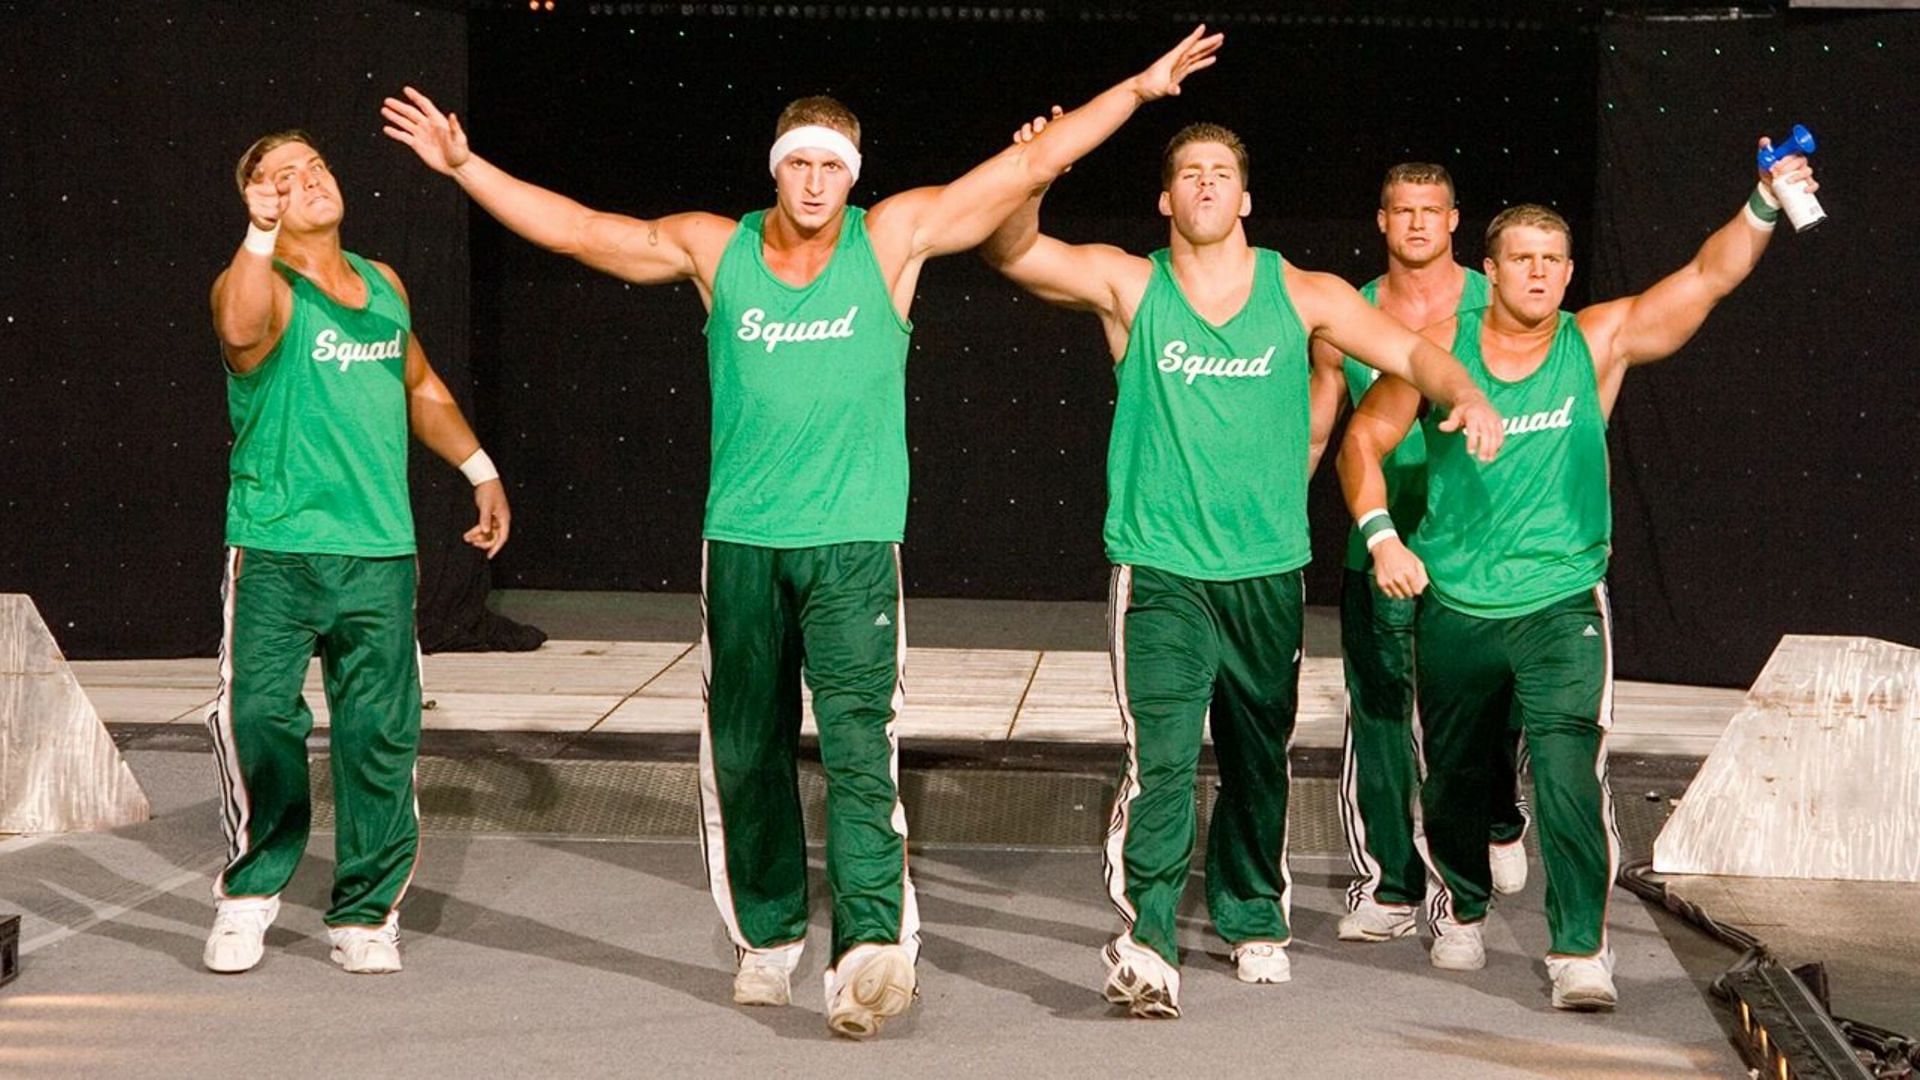 The Spirit Squad debuted on Monday Night RAW in 2006